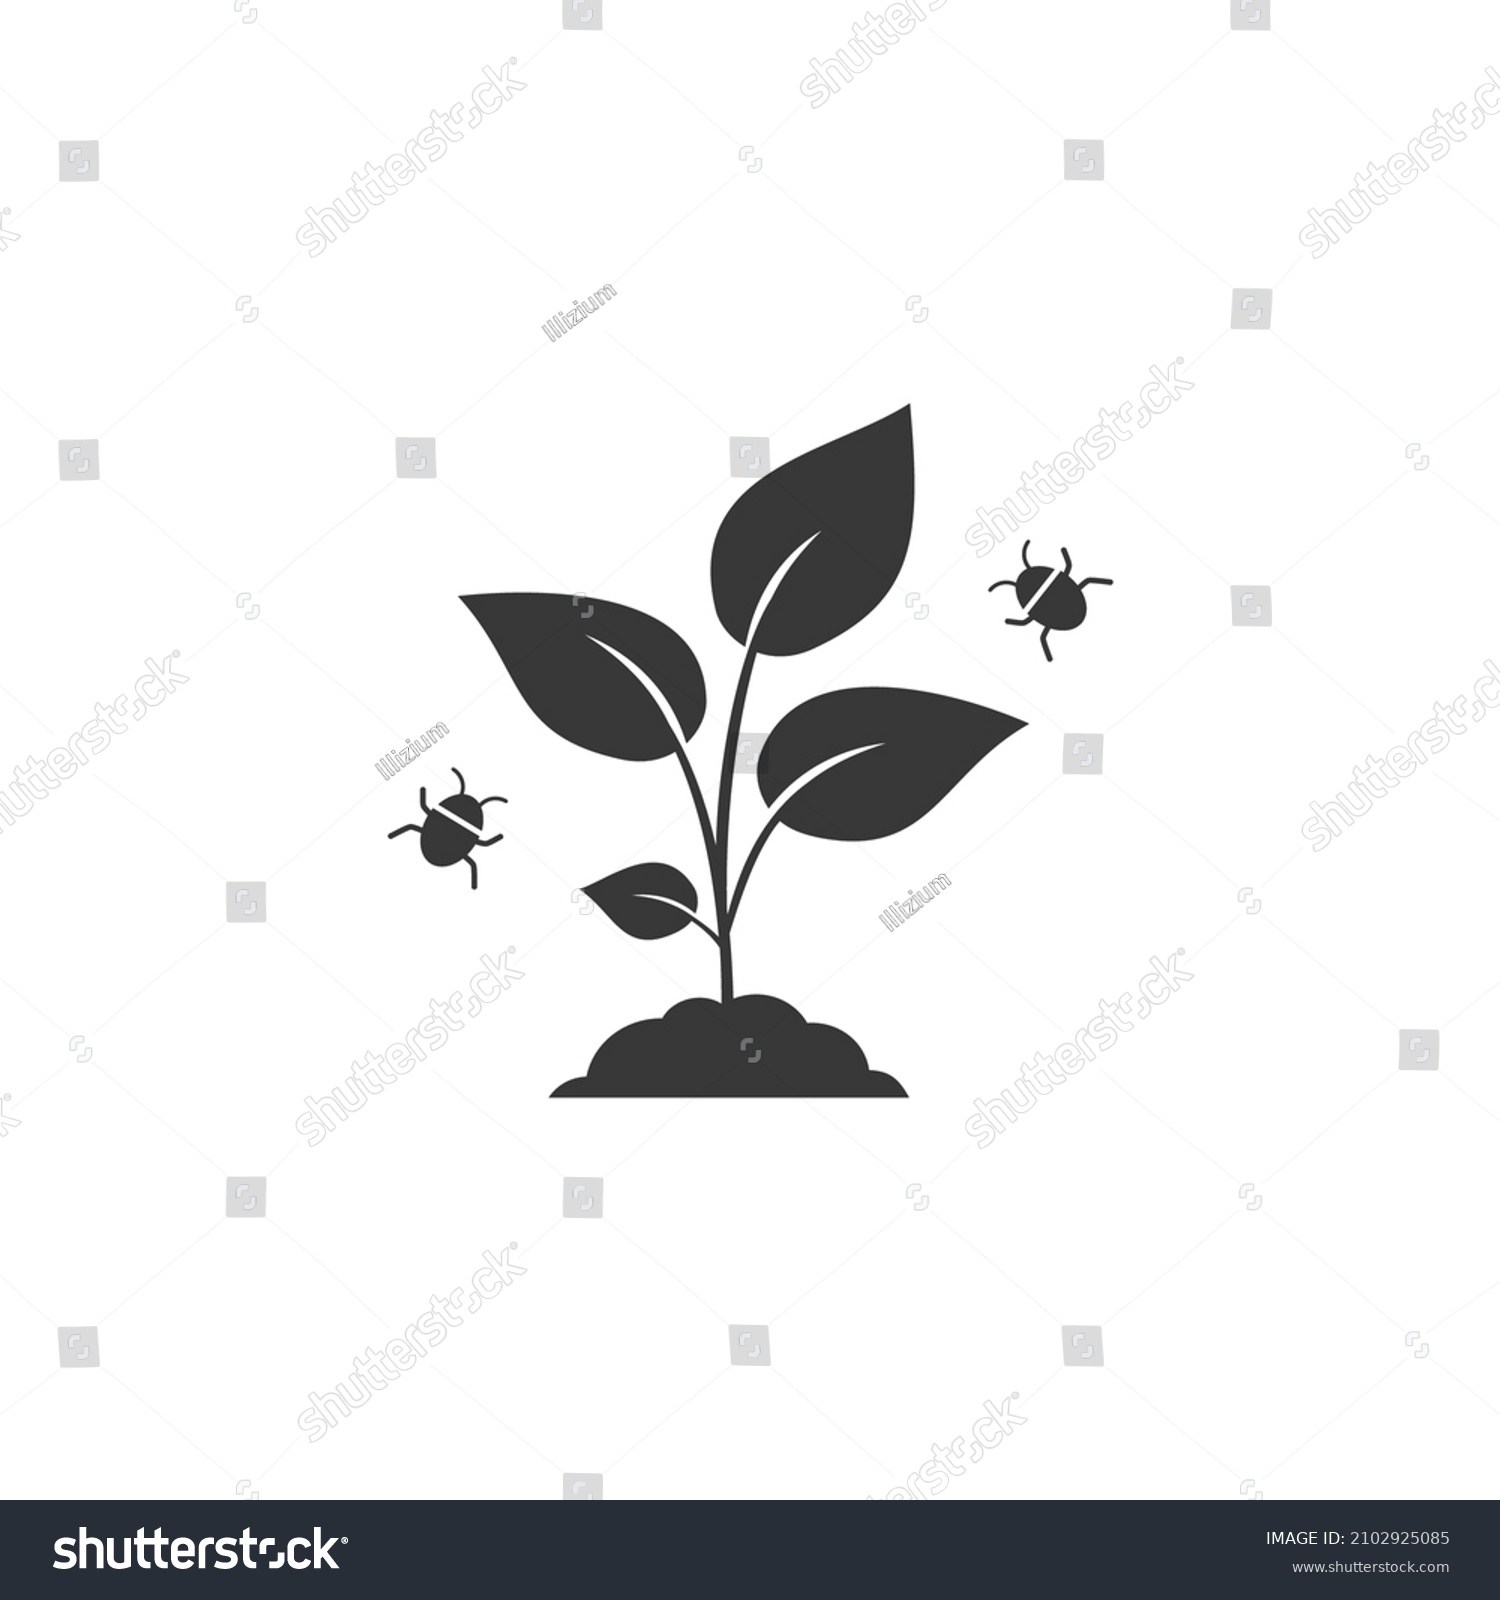 Pest plant icon, damage crop for aphid attack, harmful insect, tick or bug, editable stroke vector illustration #2102925085